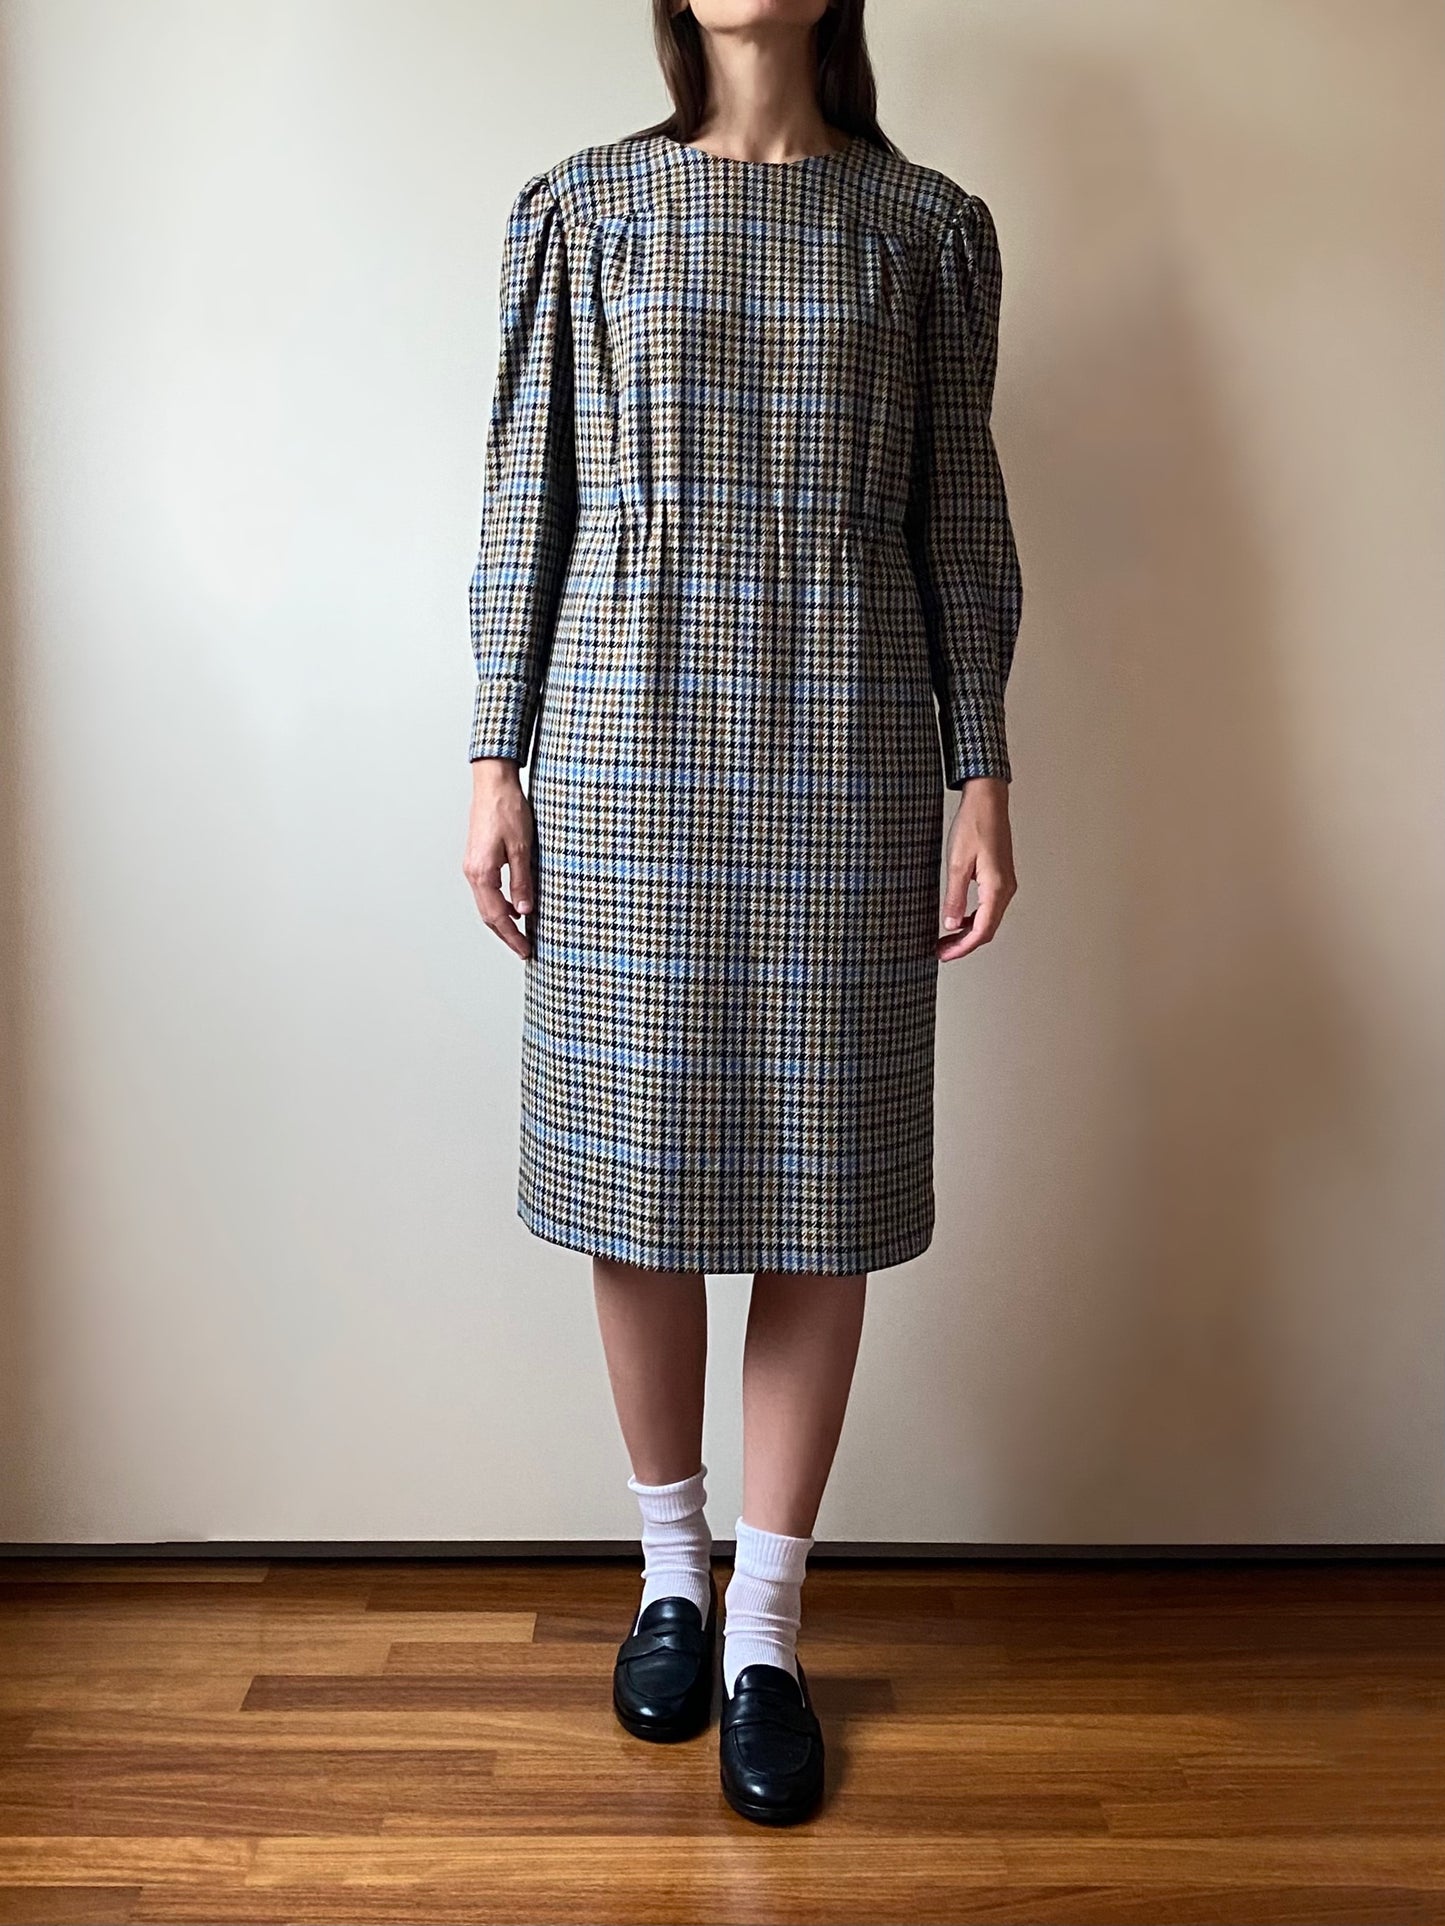 Vintage Tailored  Checkered Dress